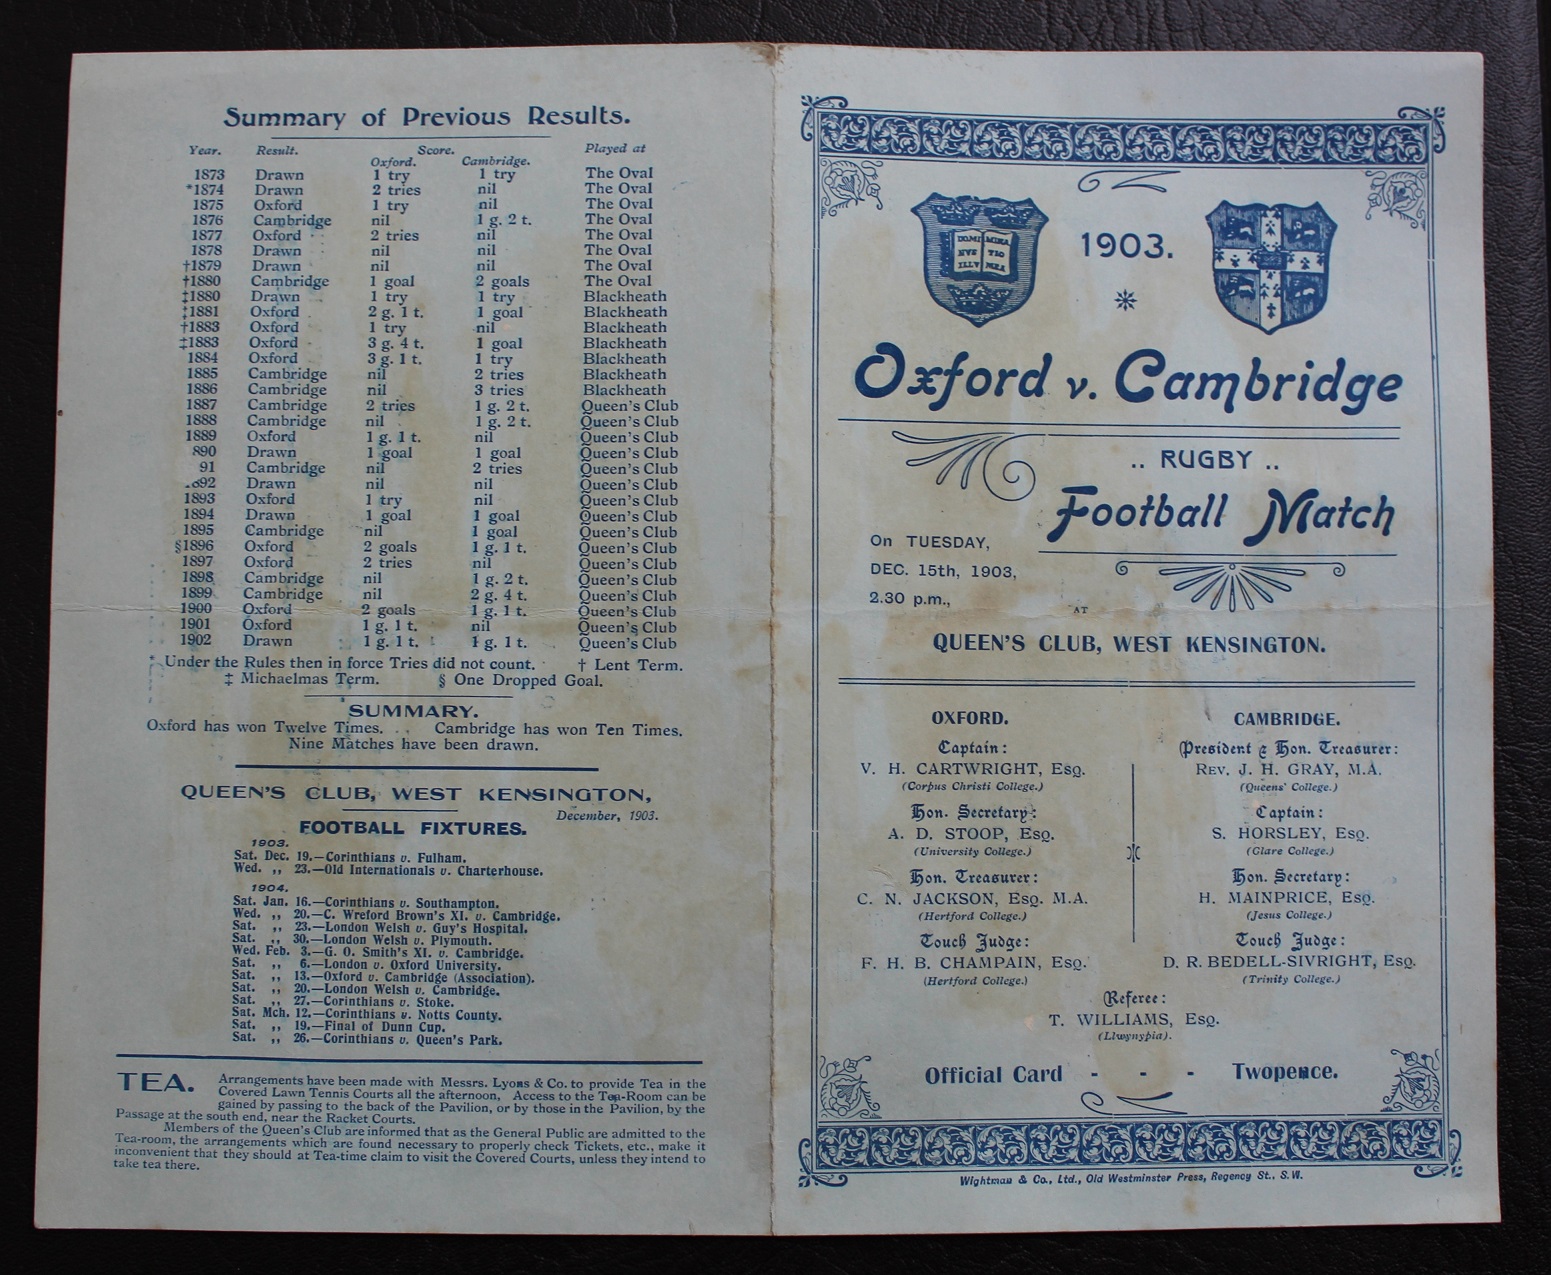 1903 Oxford v Cambrige - official match programme - Rugby Memorabilia Society - 1.jpg